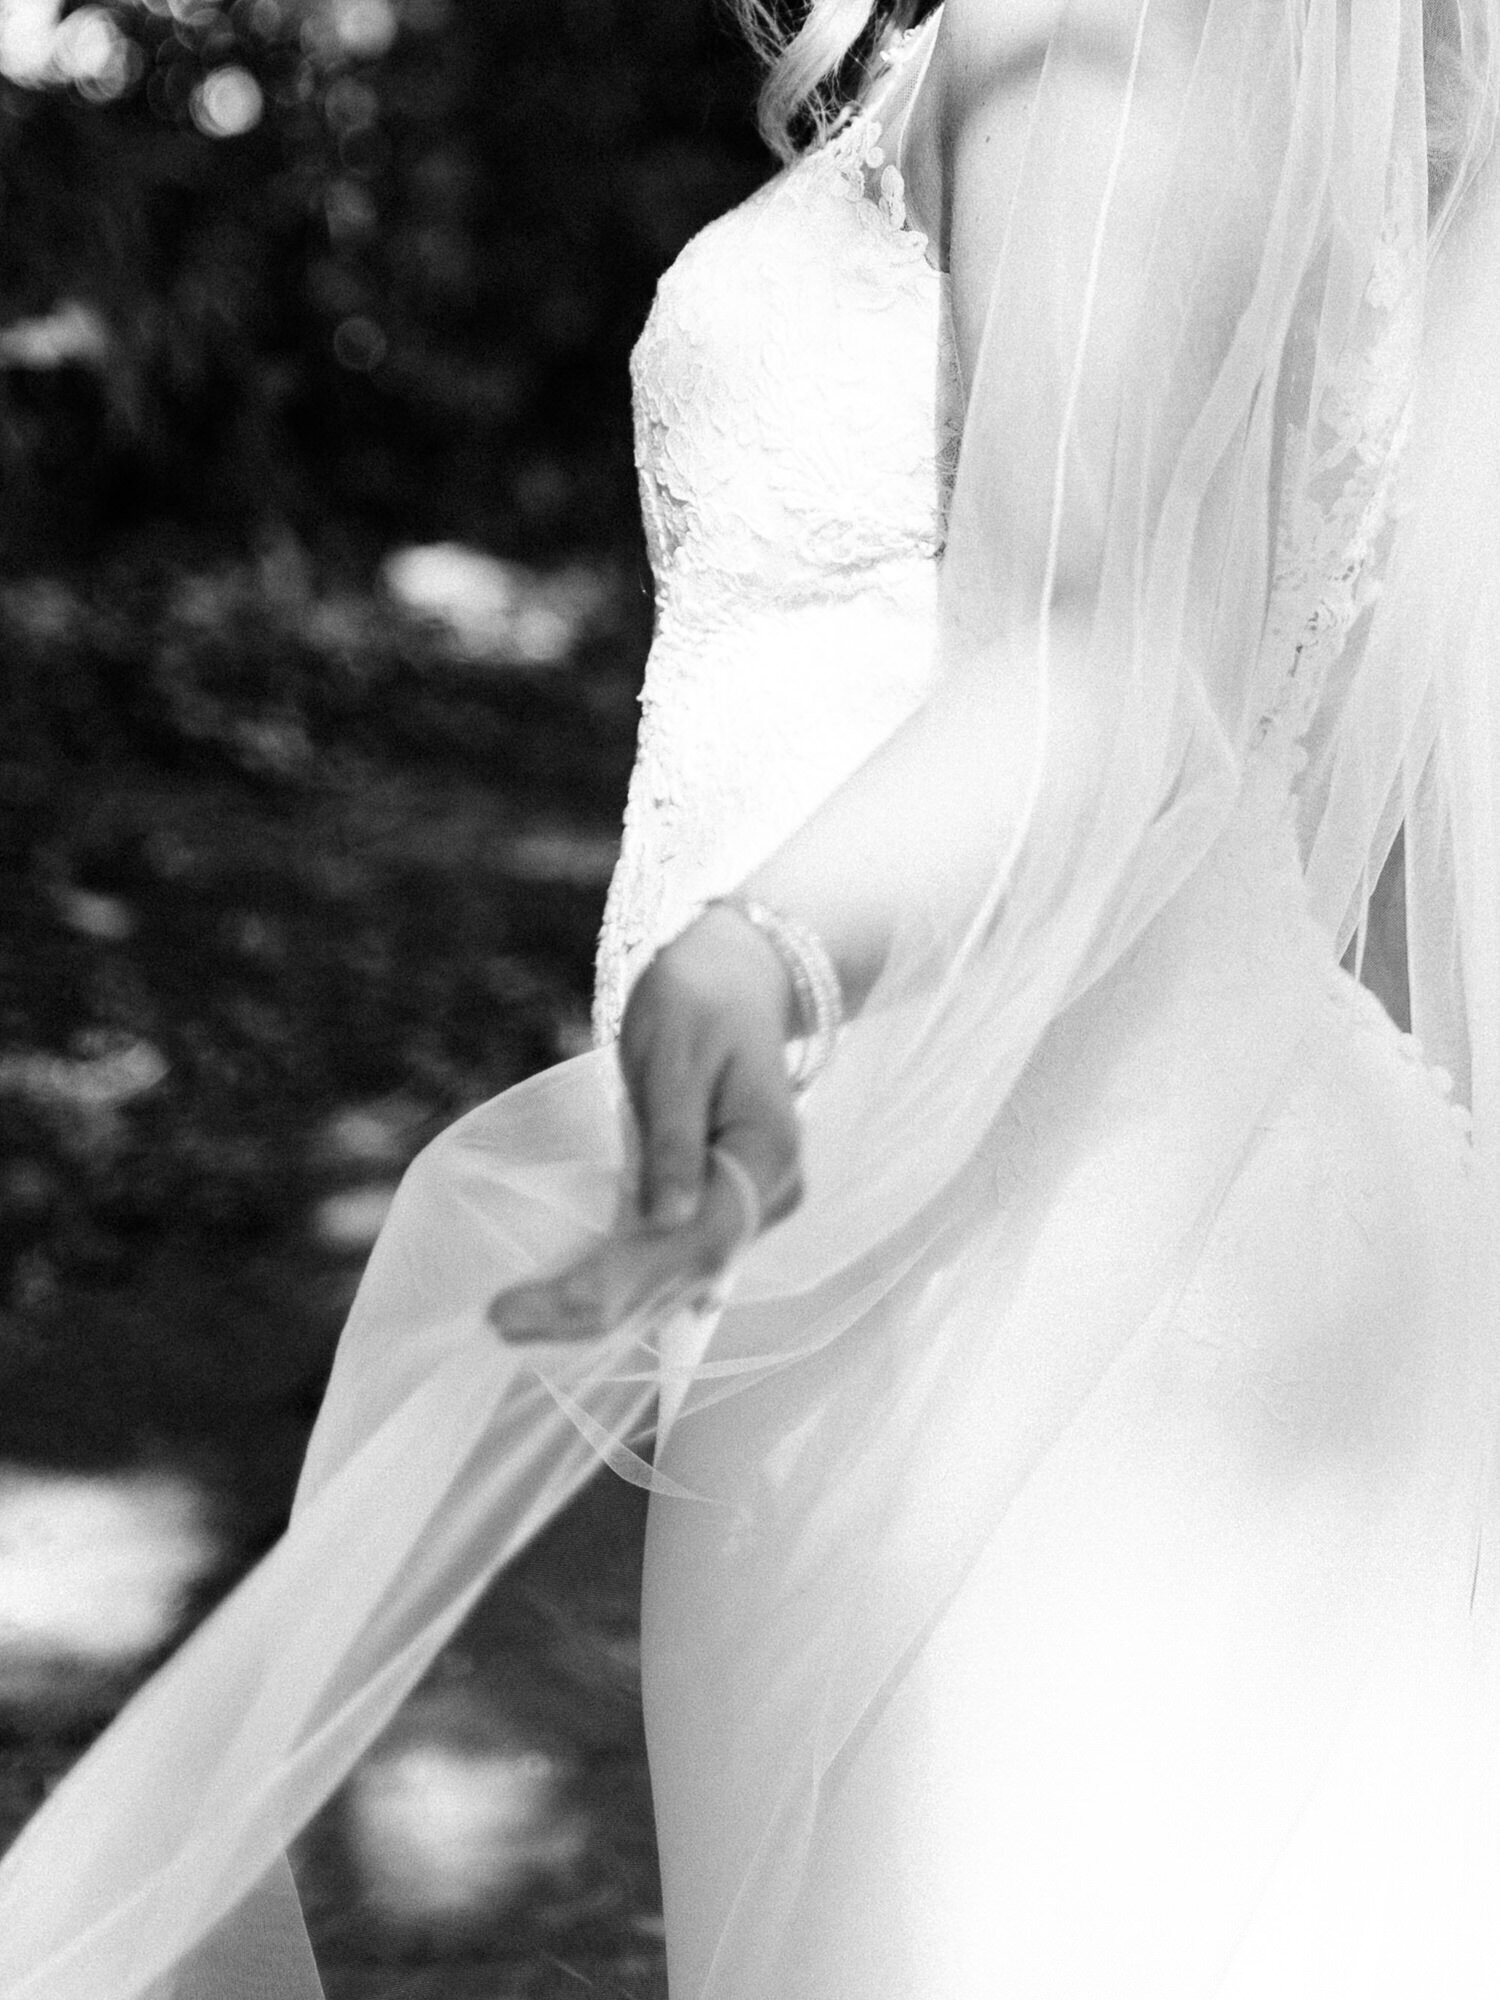 An artistic, film-inspired image taken by San Antonio wedding photographer KD Captures. A bride is twisting while holding her veil. This image only shows her hand and her veil.